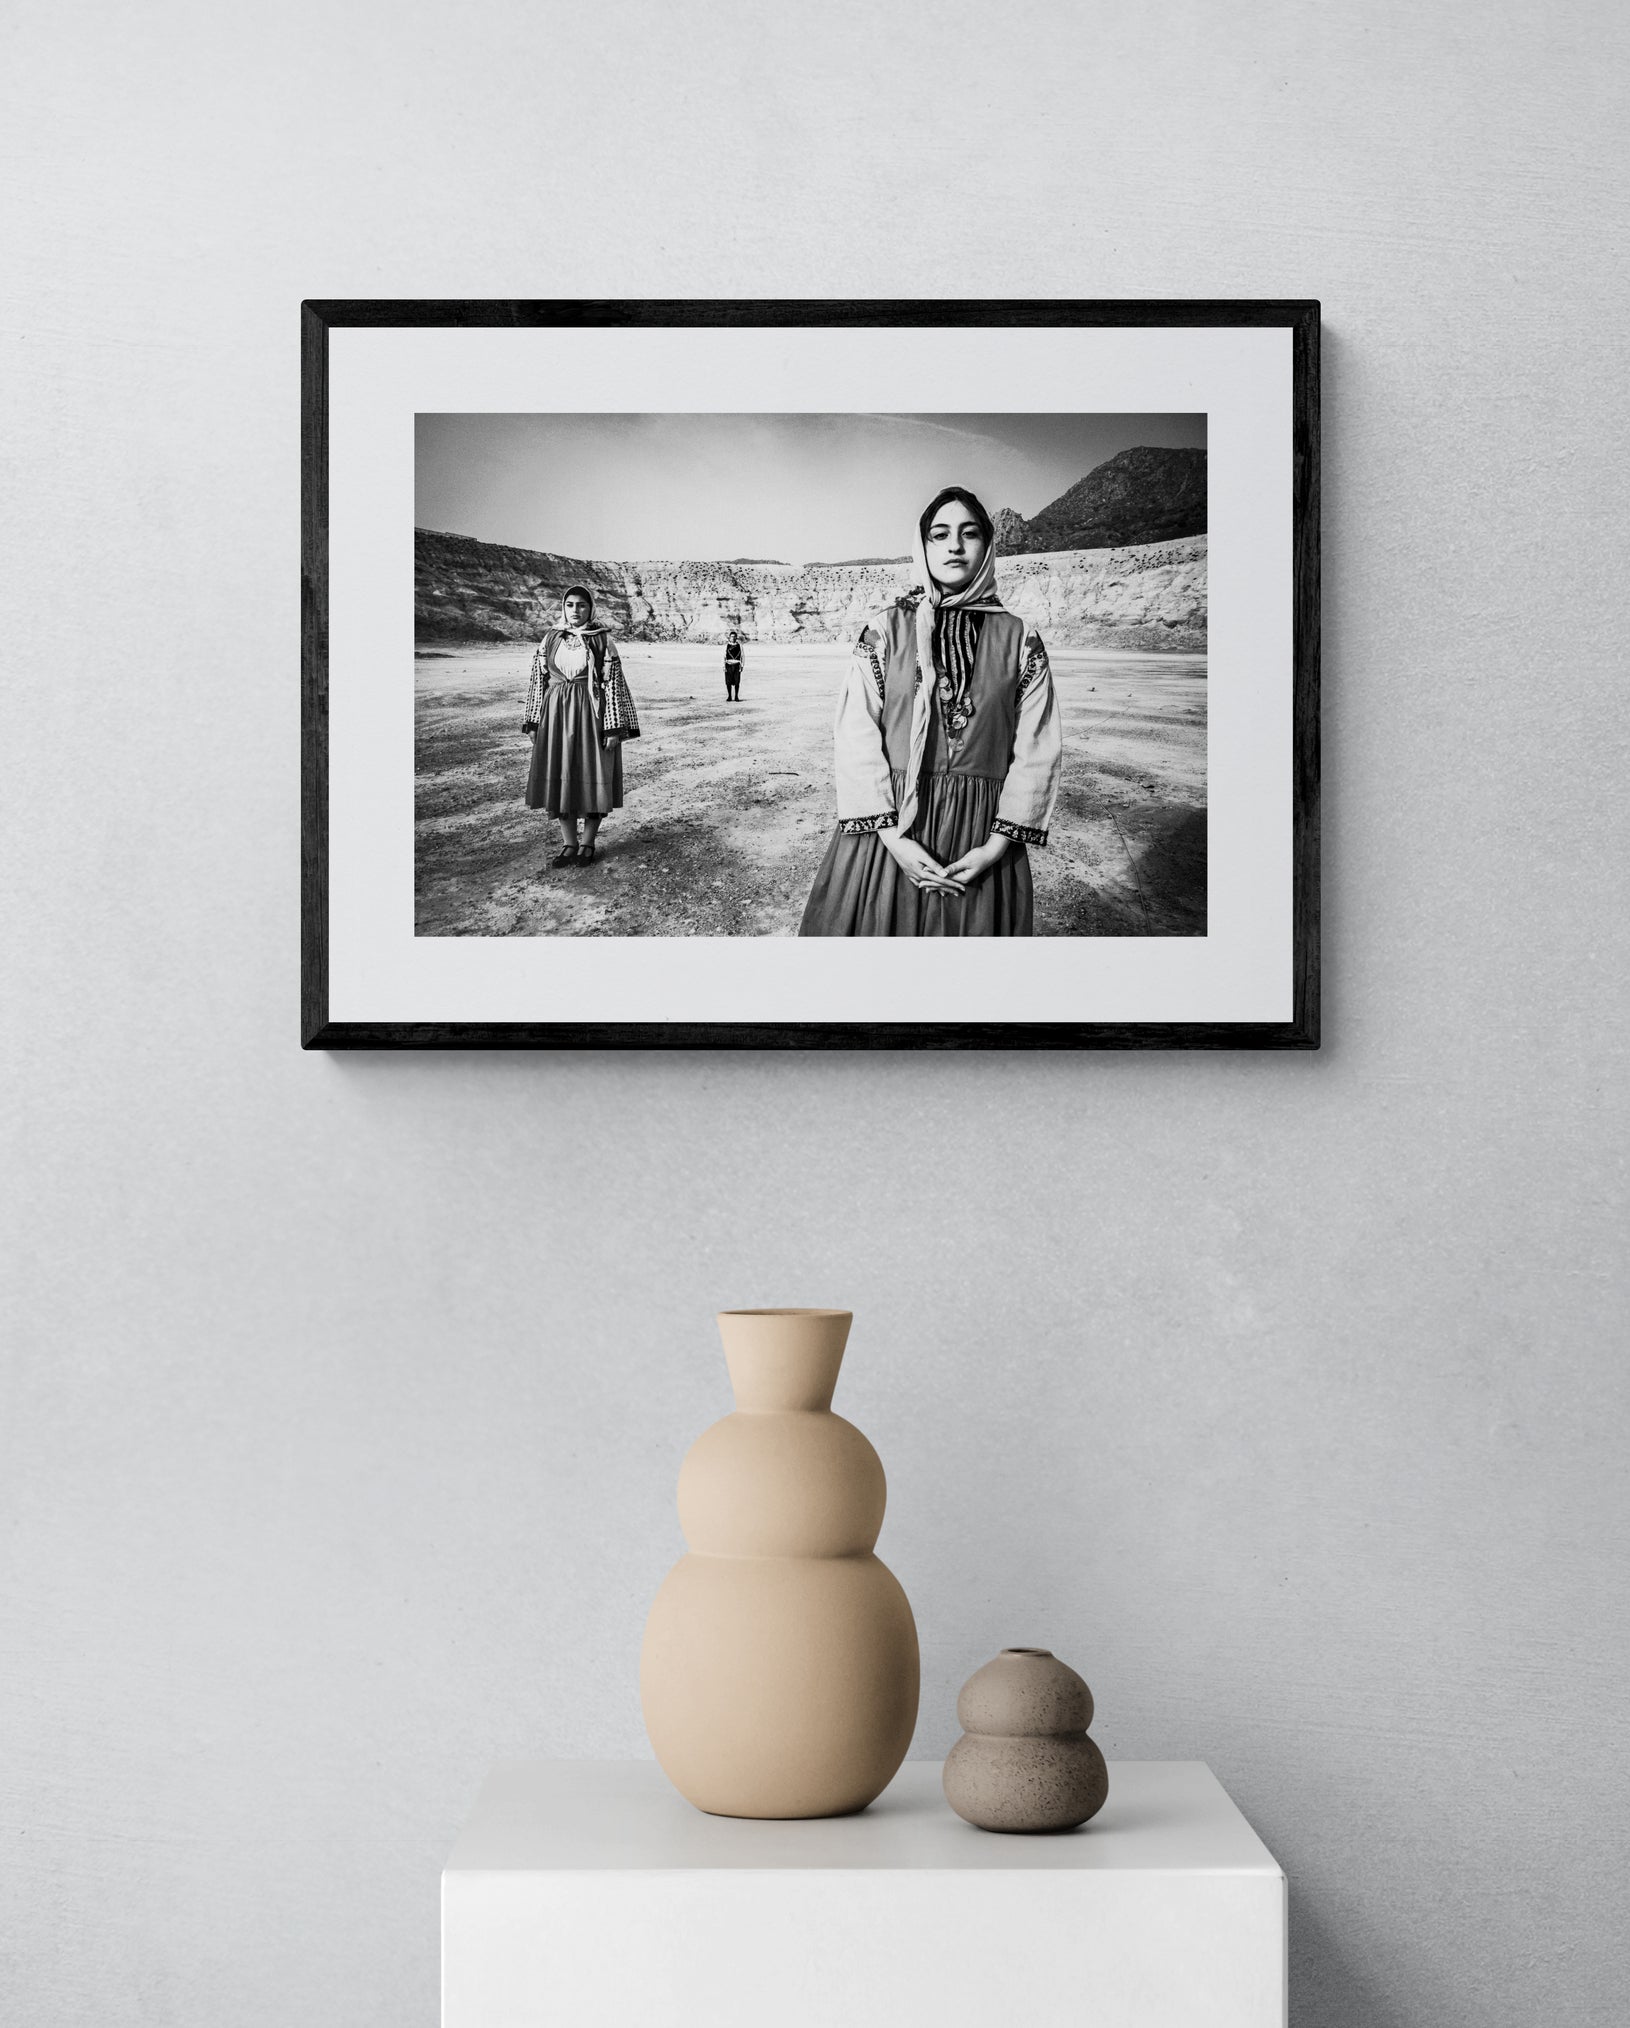 Black and White Photography Wall Art Greece | Costumes of Nisyros in the volcano Dodecanese Greece by George Tatakis - single framed photo